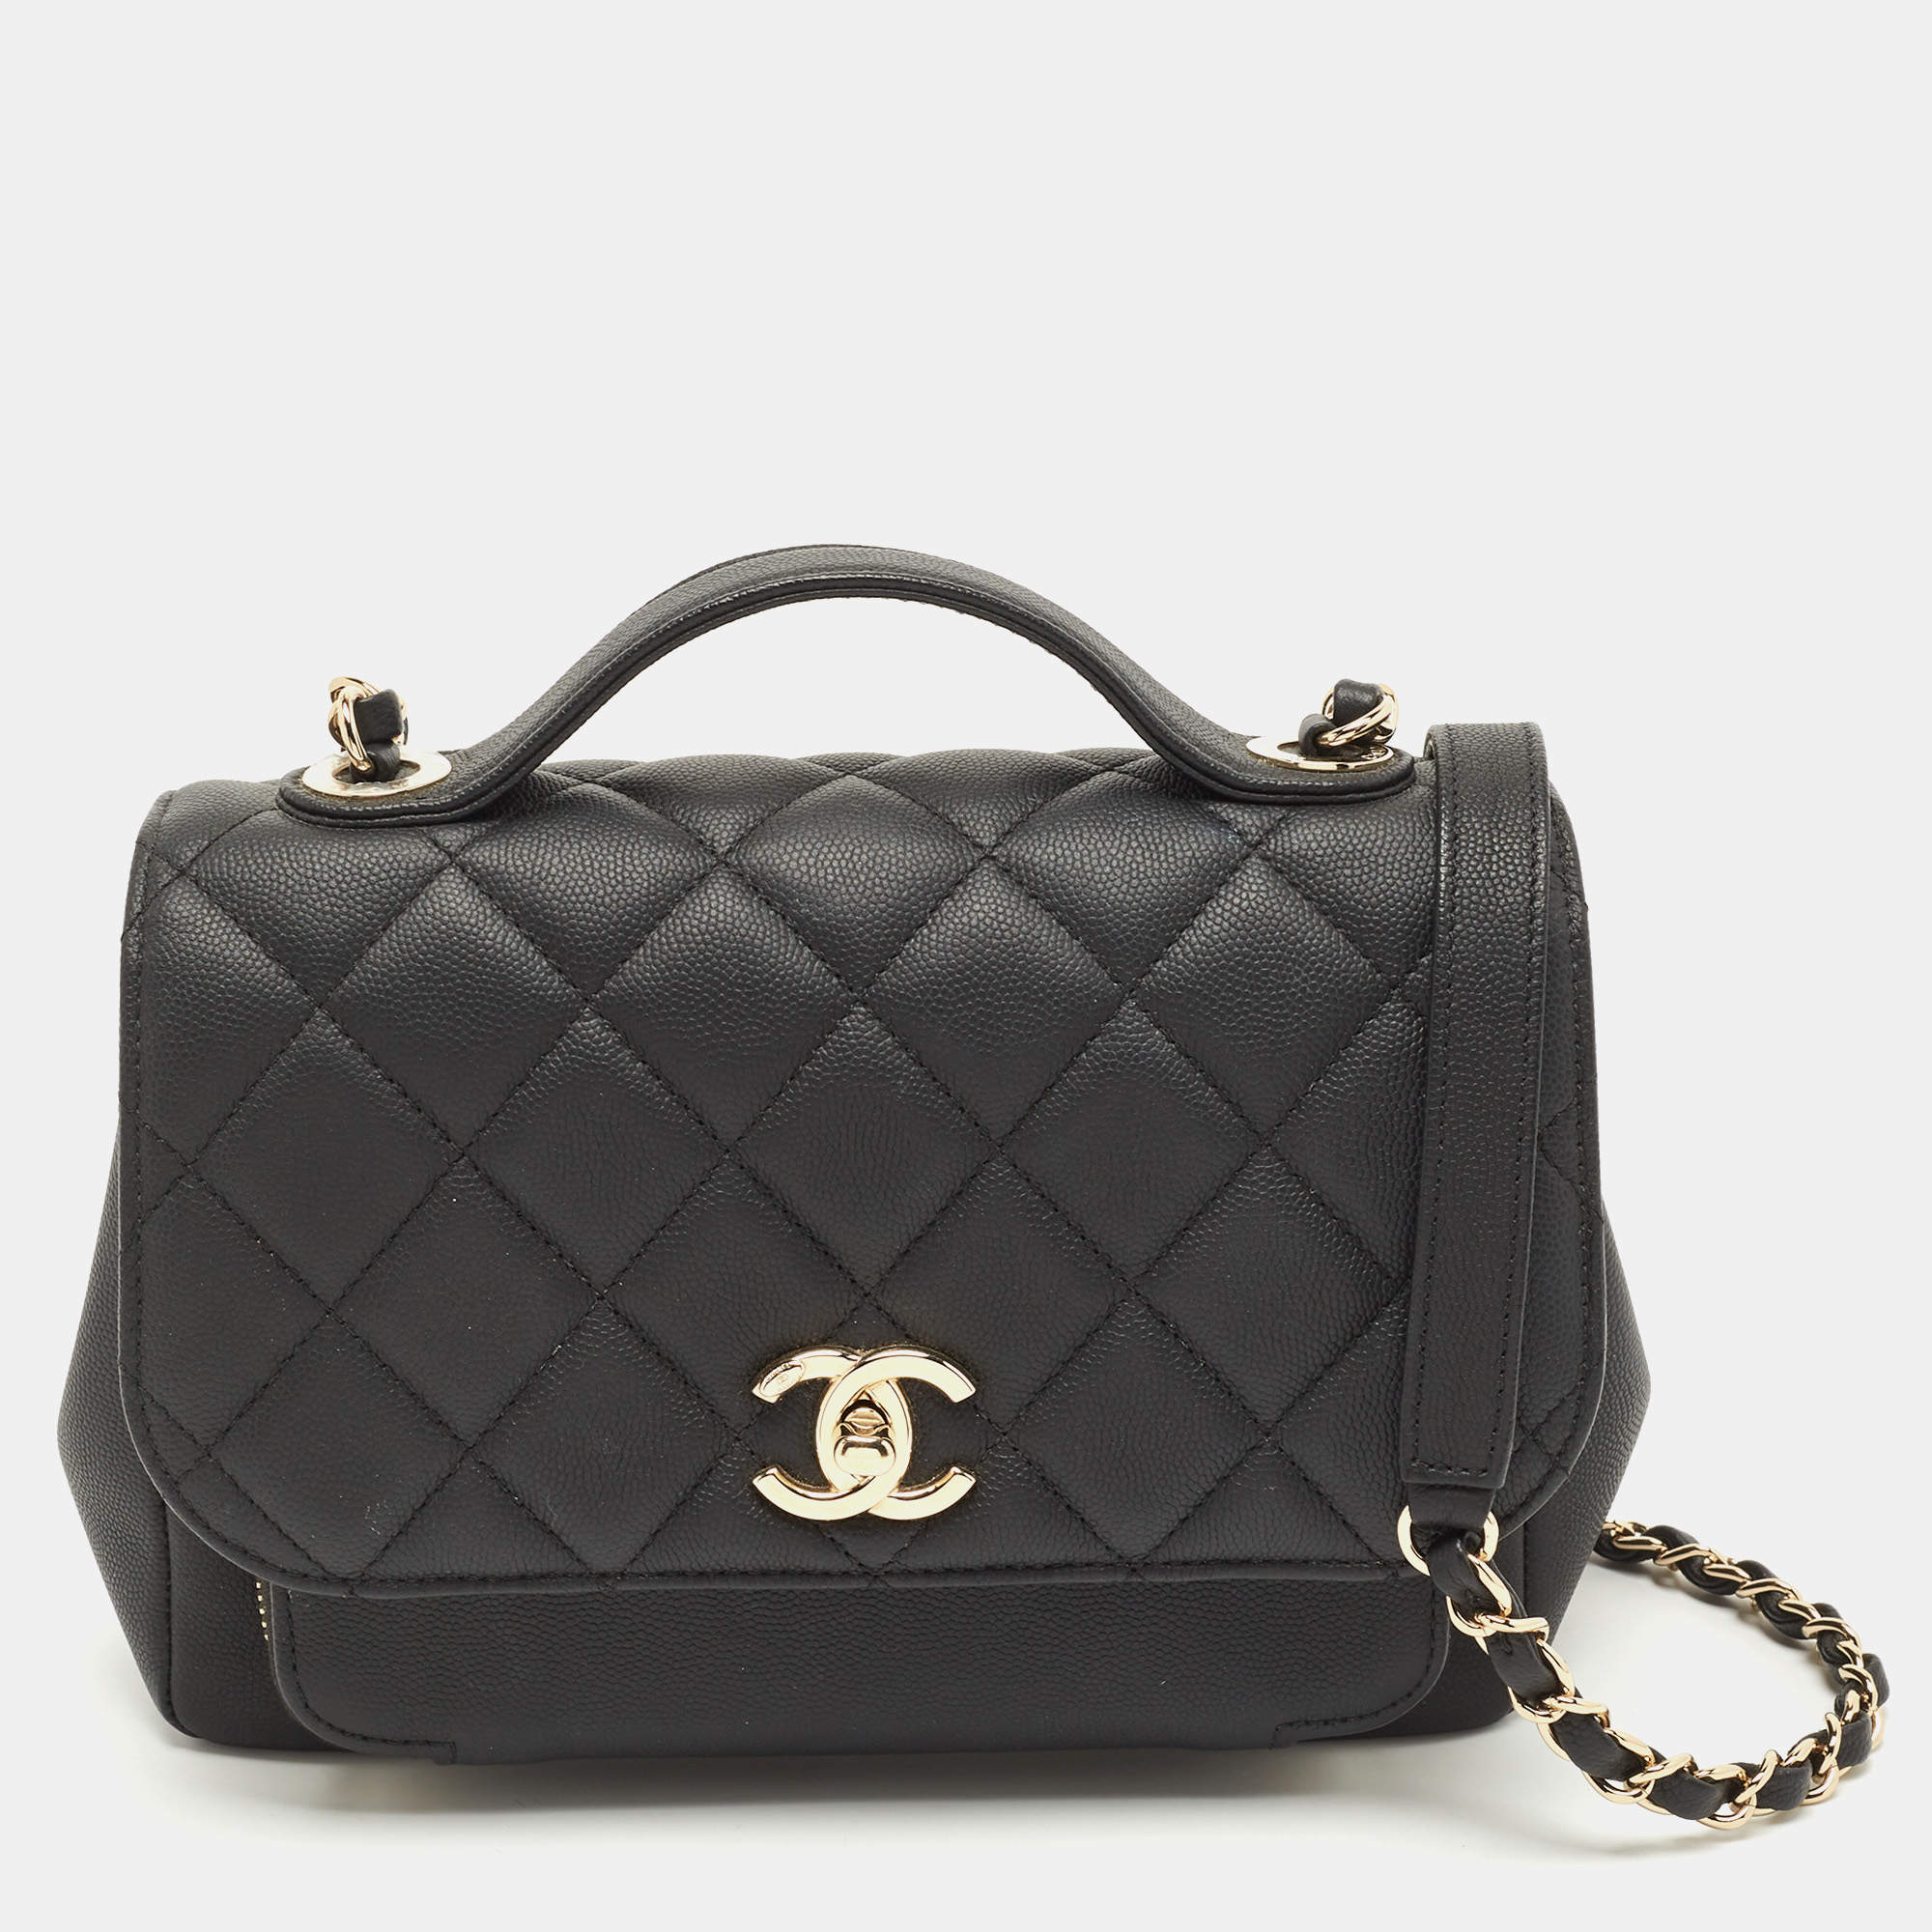 Chanel Red Caviar Leather Small Business Affinity Flap Shoulder Bag Chanel  | The Luxury Closet